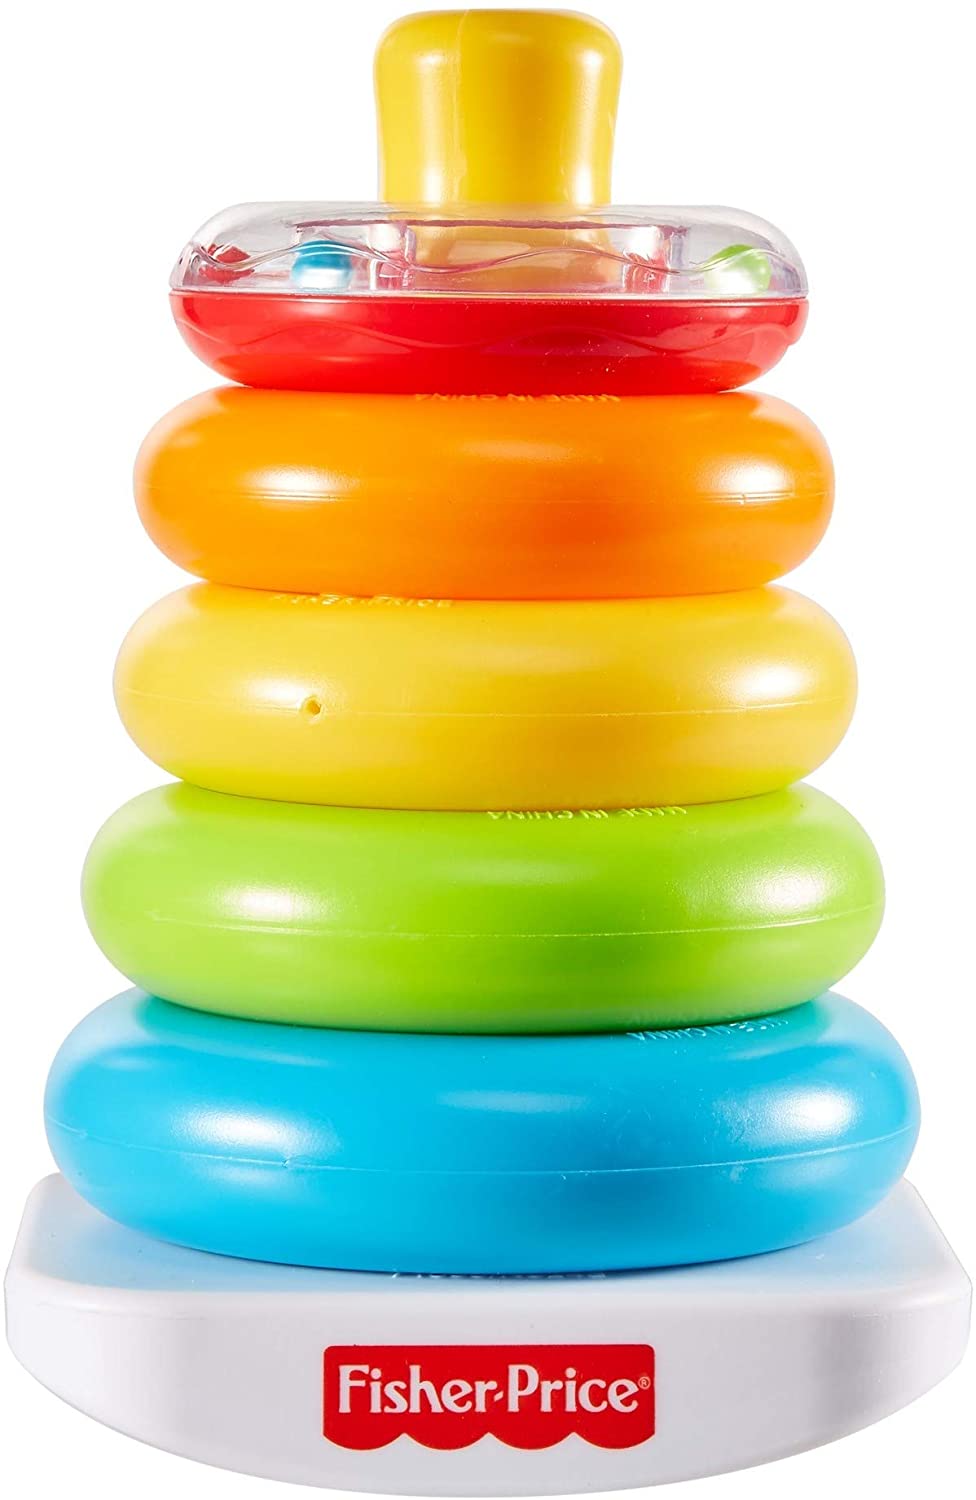 Fisher-Price Rock-a-Stack Bat-at Ring-Stacking Toy for Infants $3.50 + Free Shipping w/ Prime or on $25+